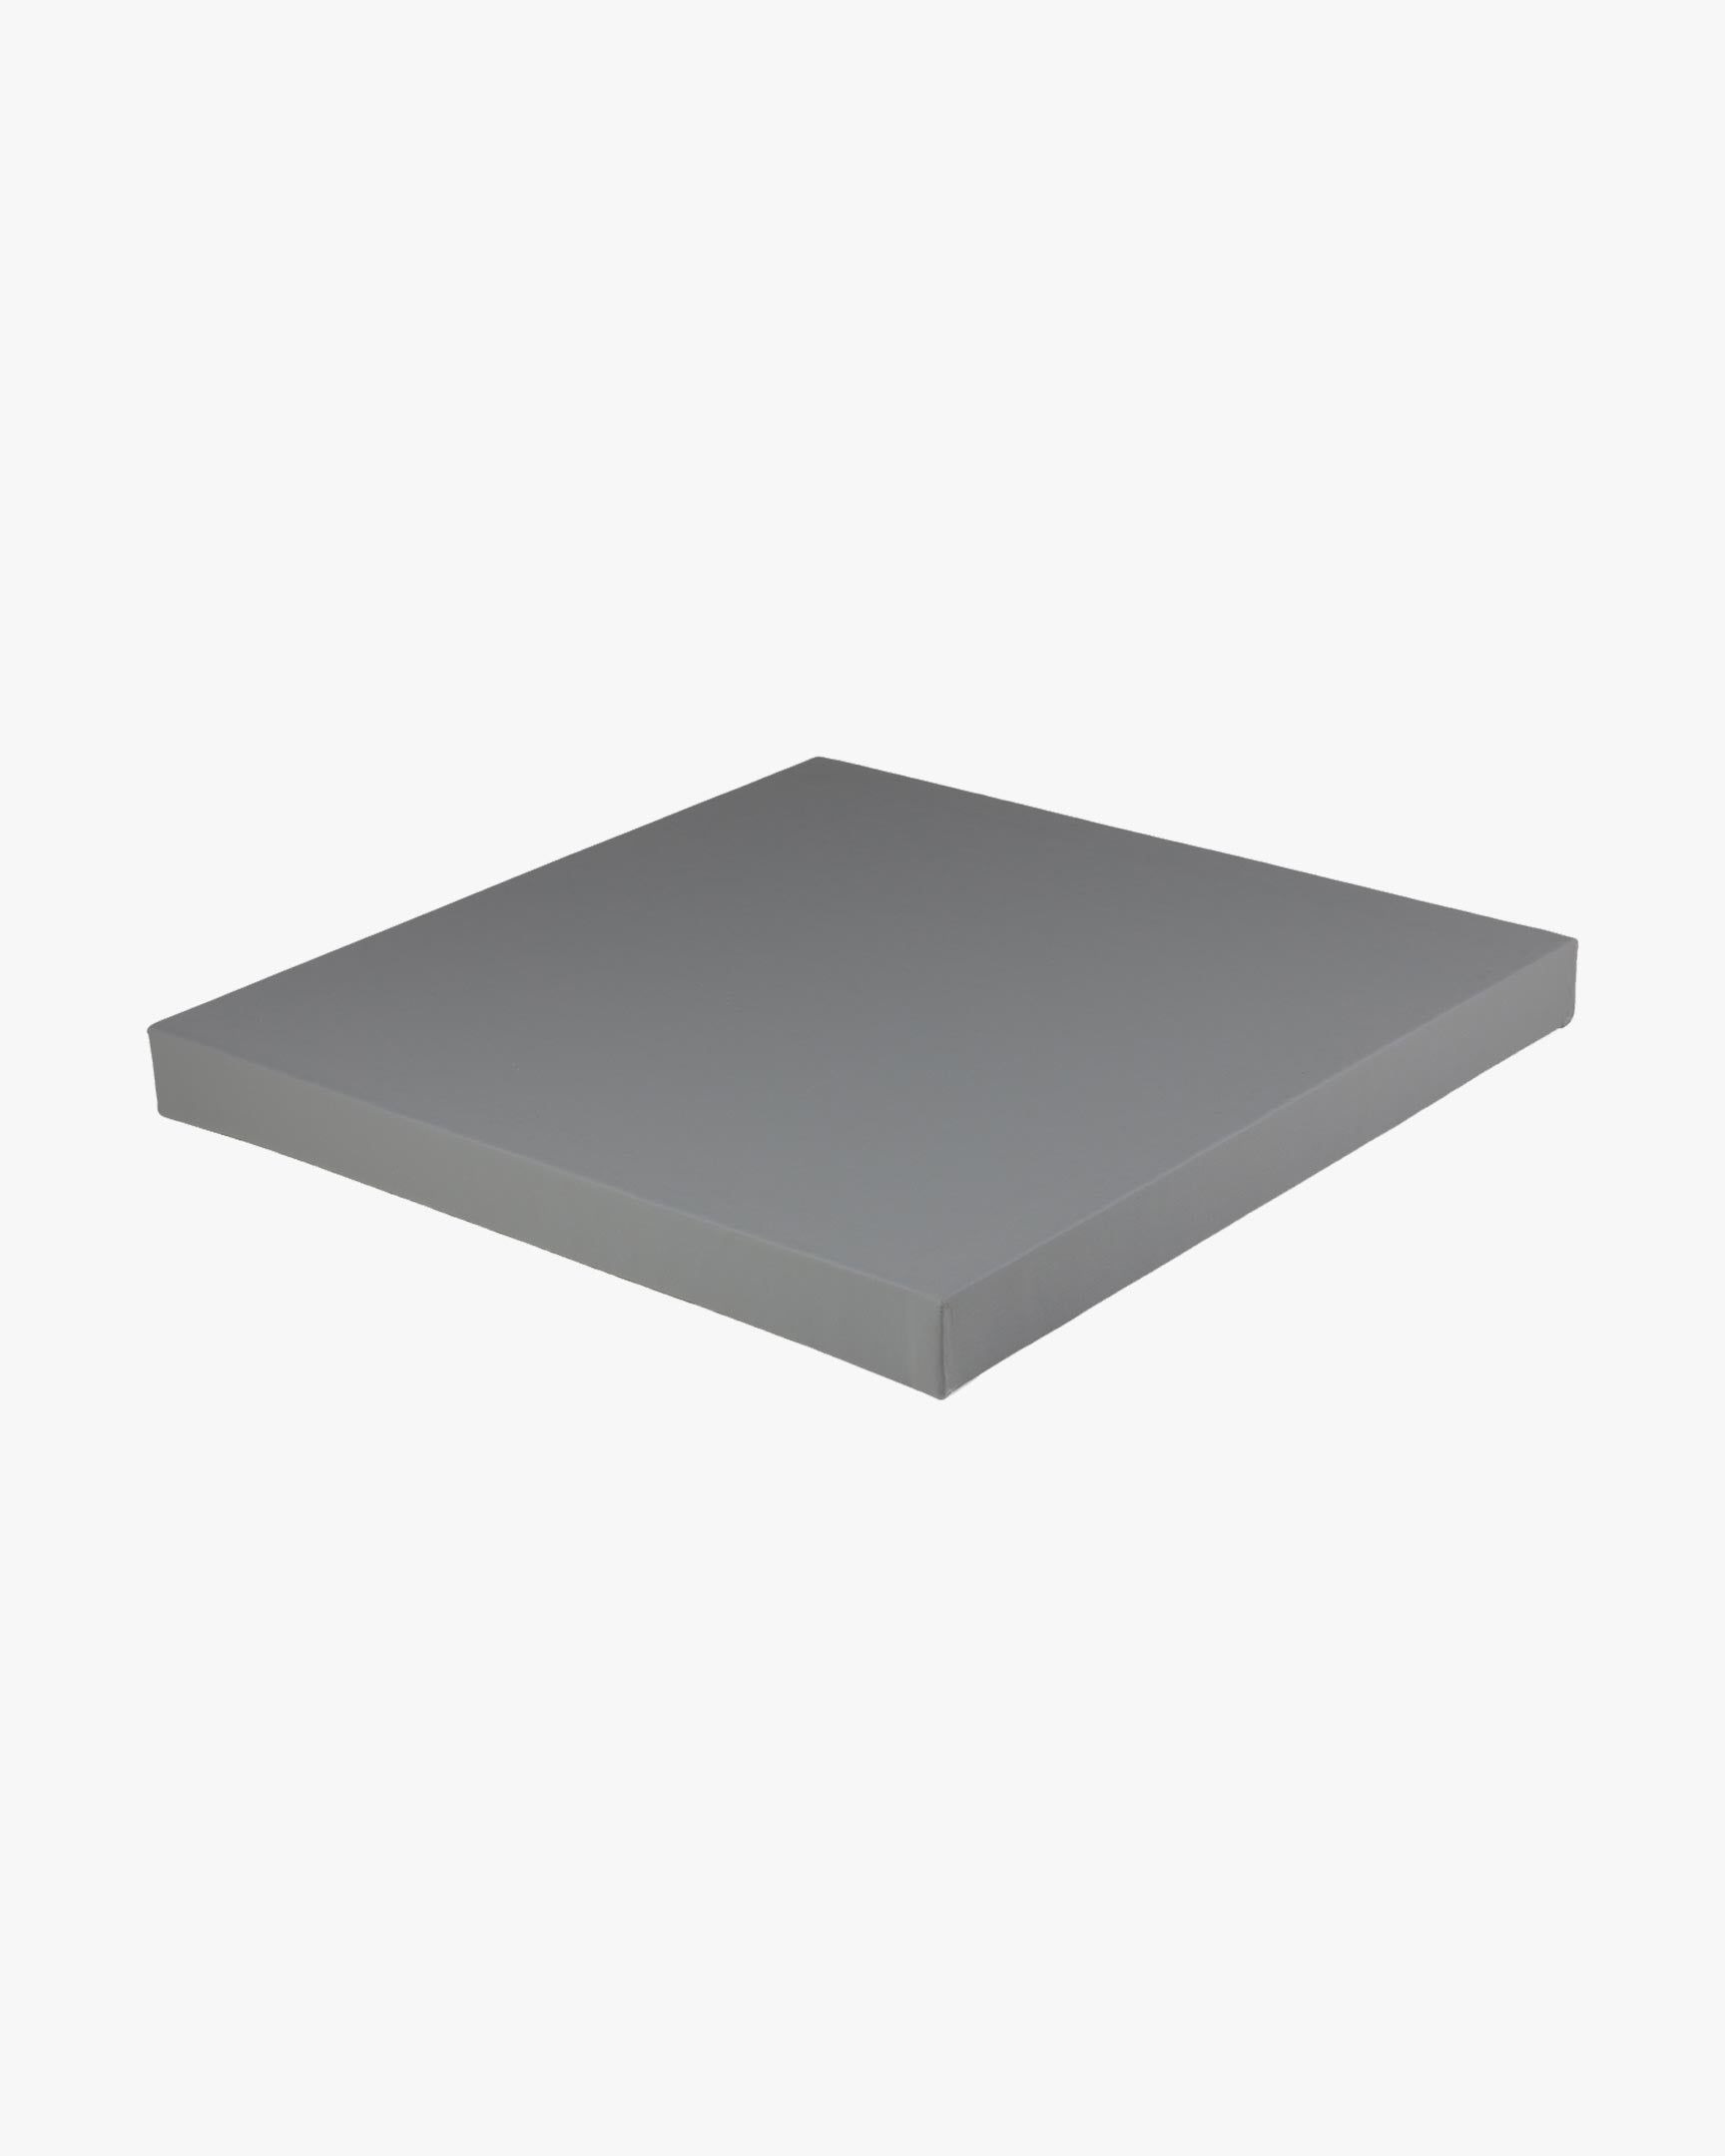 Smooth Tile Mat 1m x 1m x 1.5 In Grey